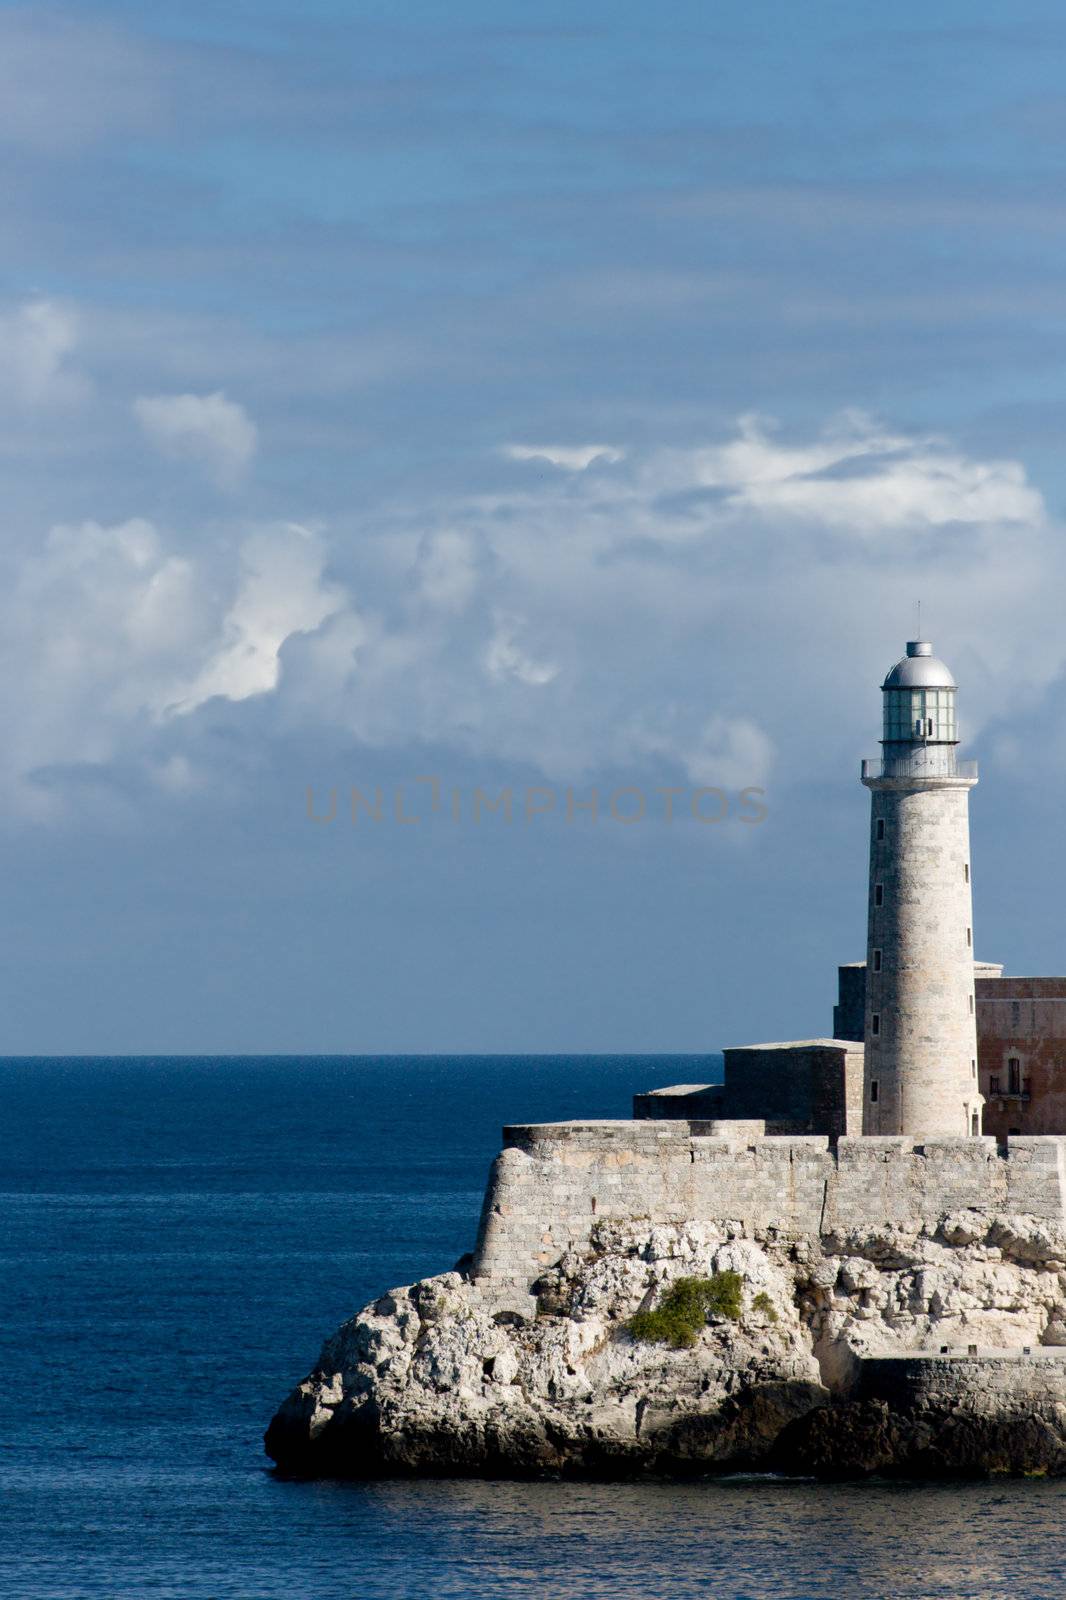 Old lighthouse on the rock at El Morro with a blue cloudy sky in a background. Havana, Cuba.